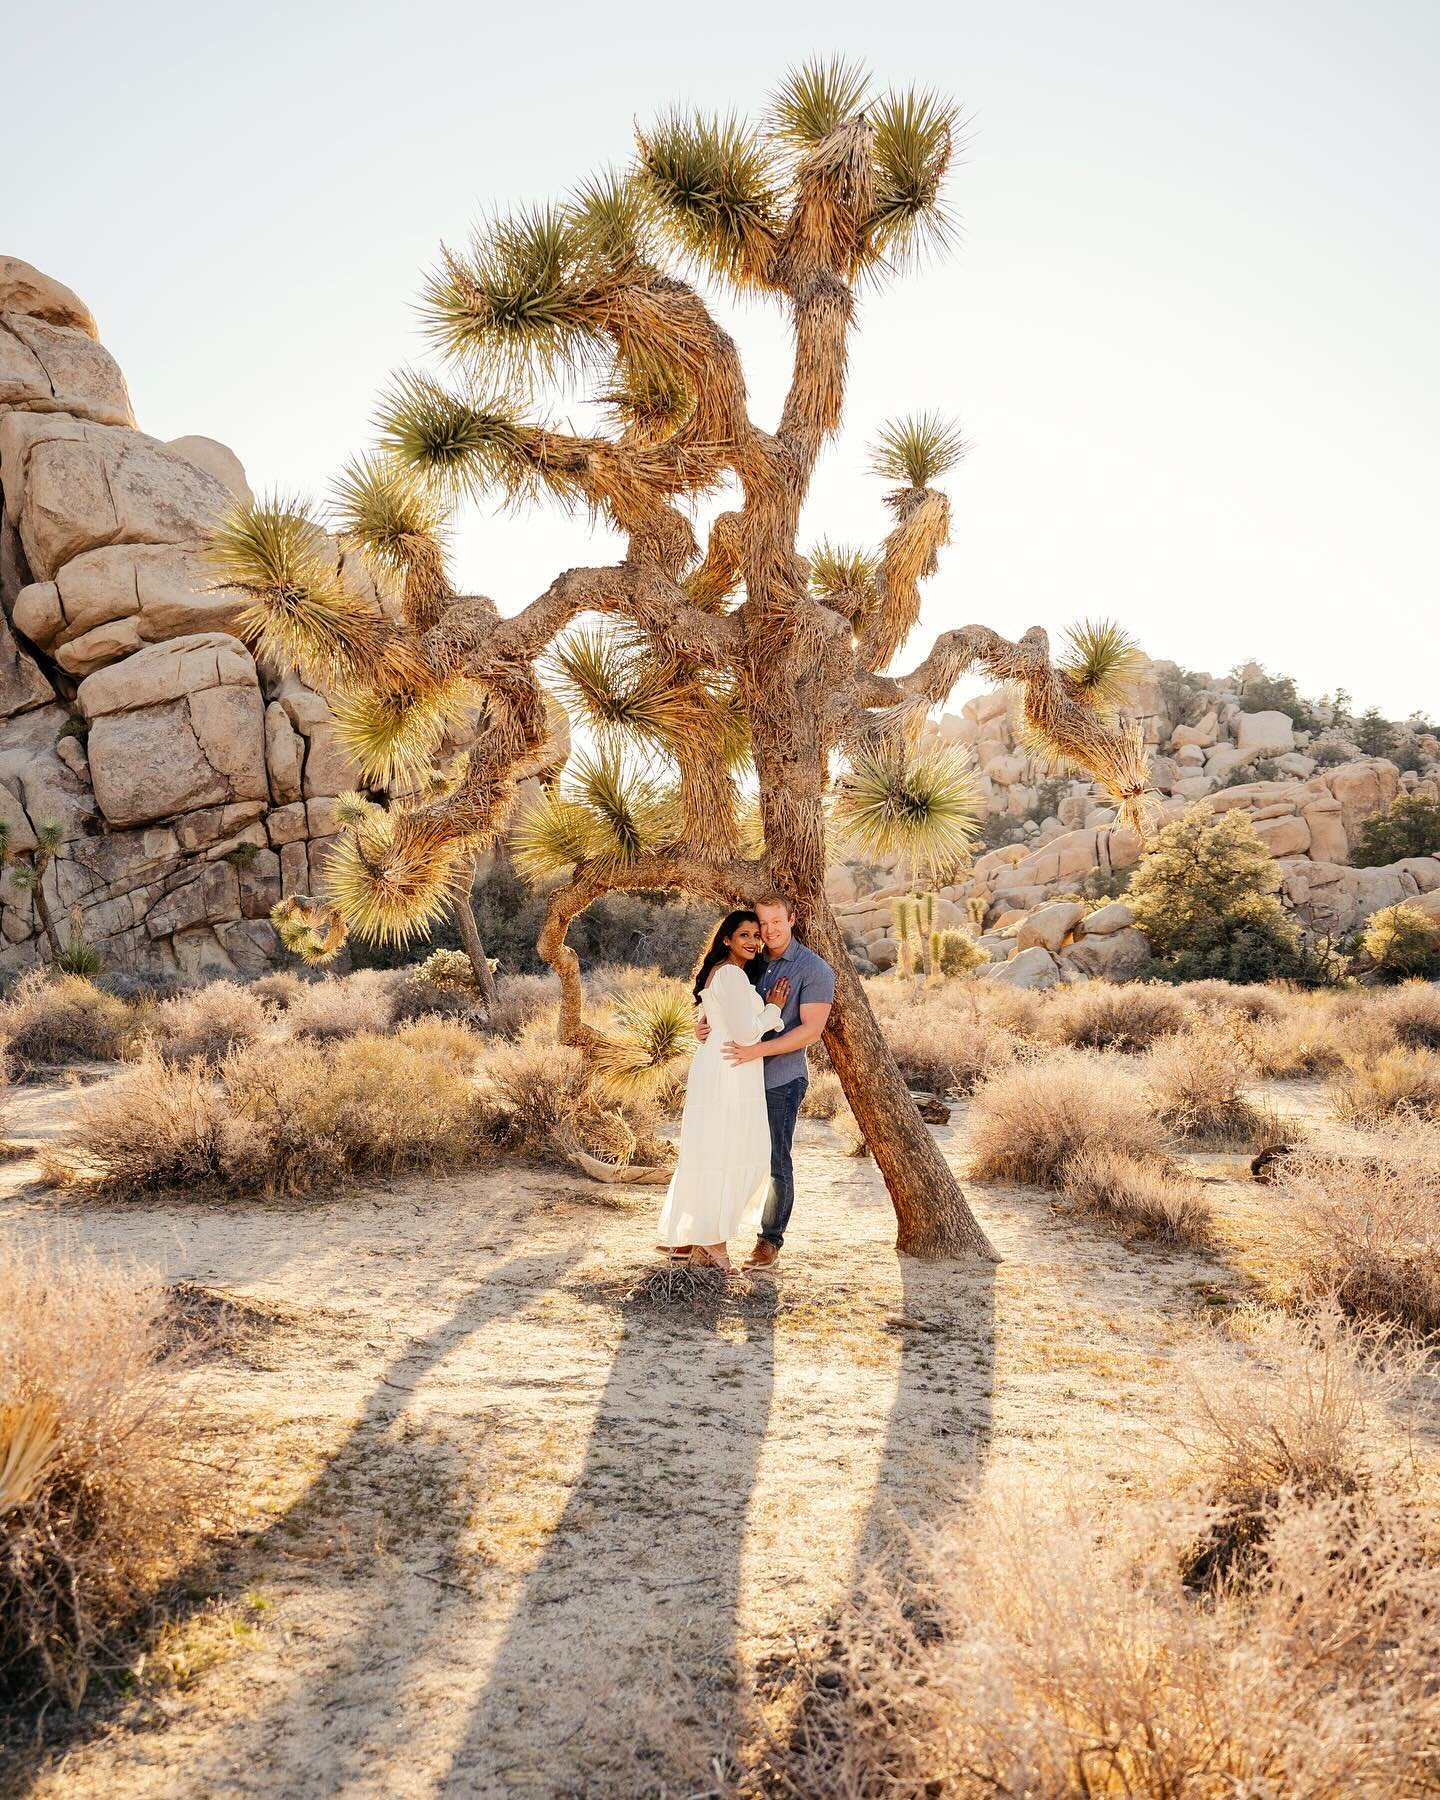 Have you been in Joshua Tree National Park? And what about with a photographer? 🤩 

#joshuatreenationalpark #losangelesphotographer #socalphotographer #longbeachphotographer #palmspringsphotographer #riversidephotographer #ocphotographer #laphotogra